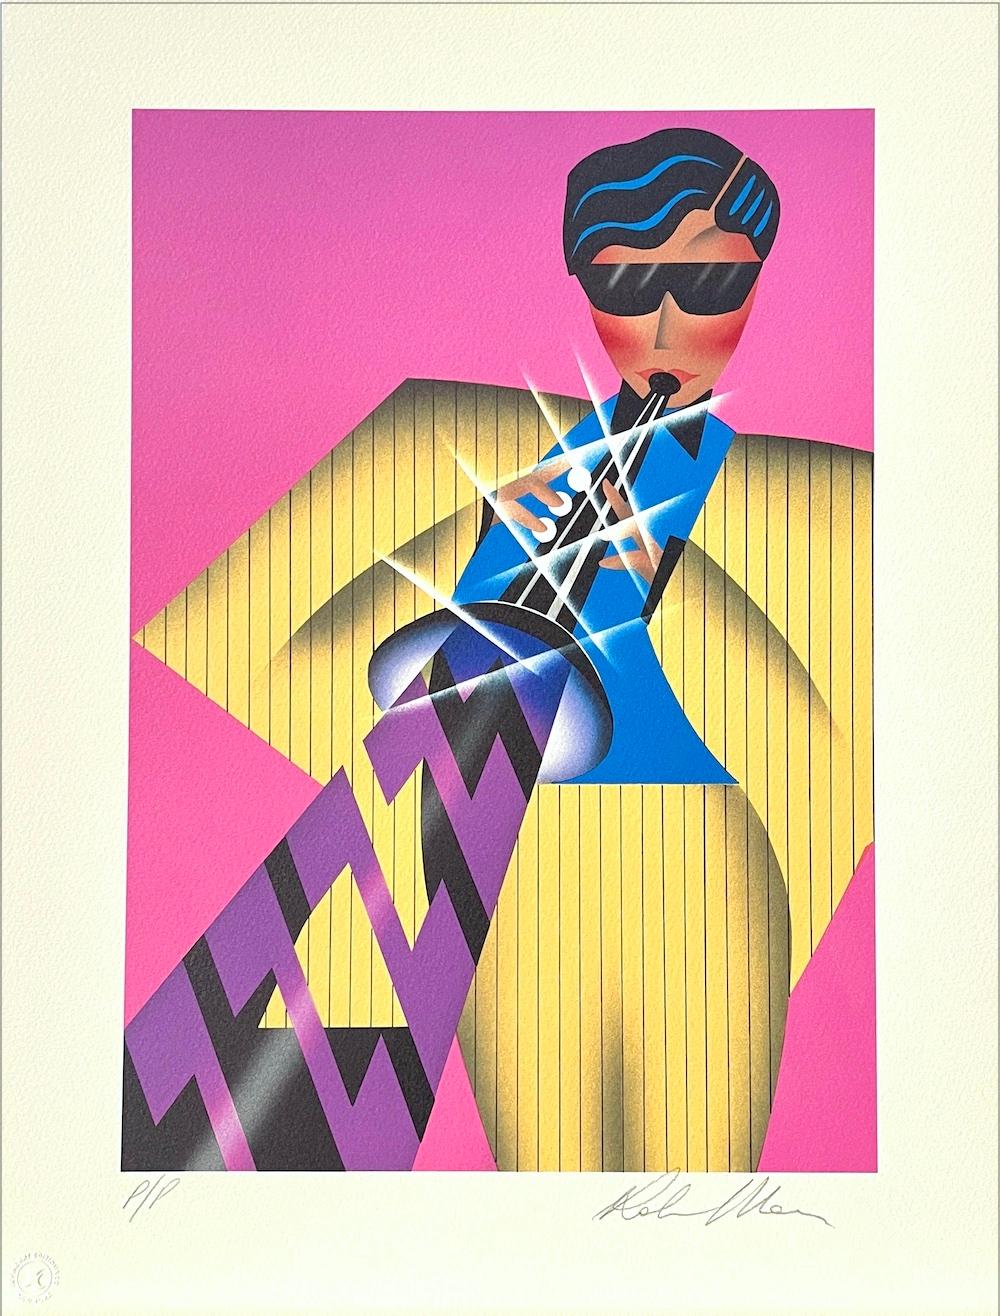 CALYPSO Signed Lithograph Man Playing Clarinet Yellow Pin Stripe Suit, Hot Pink